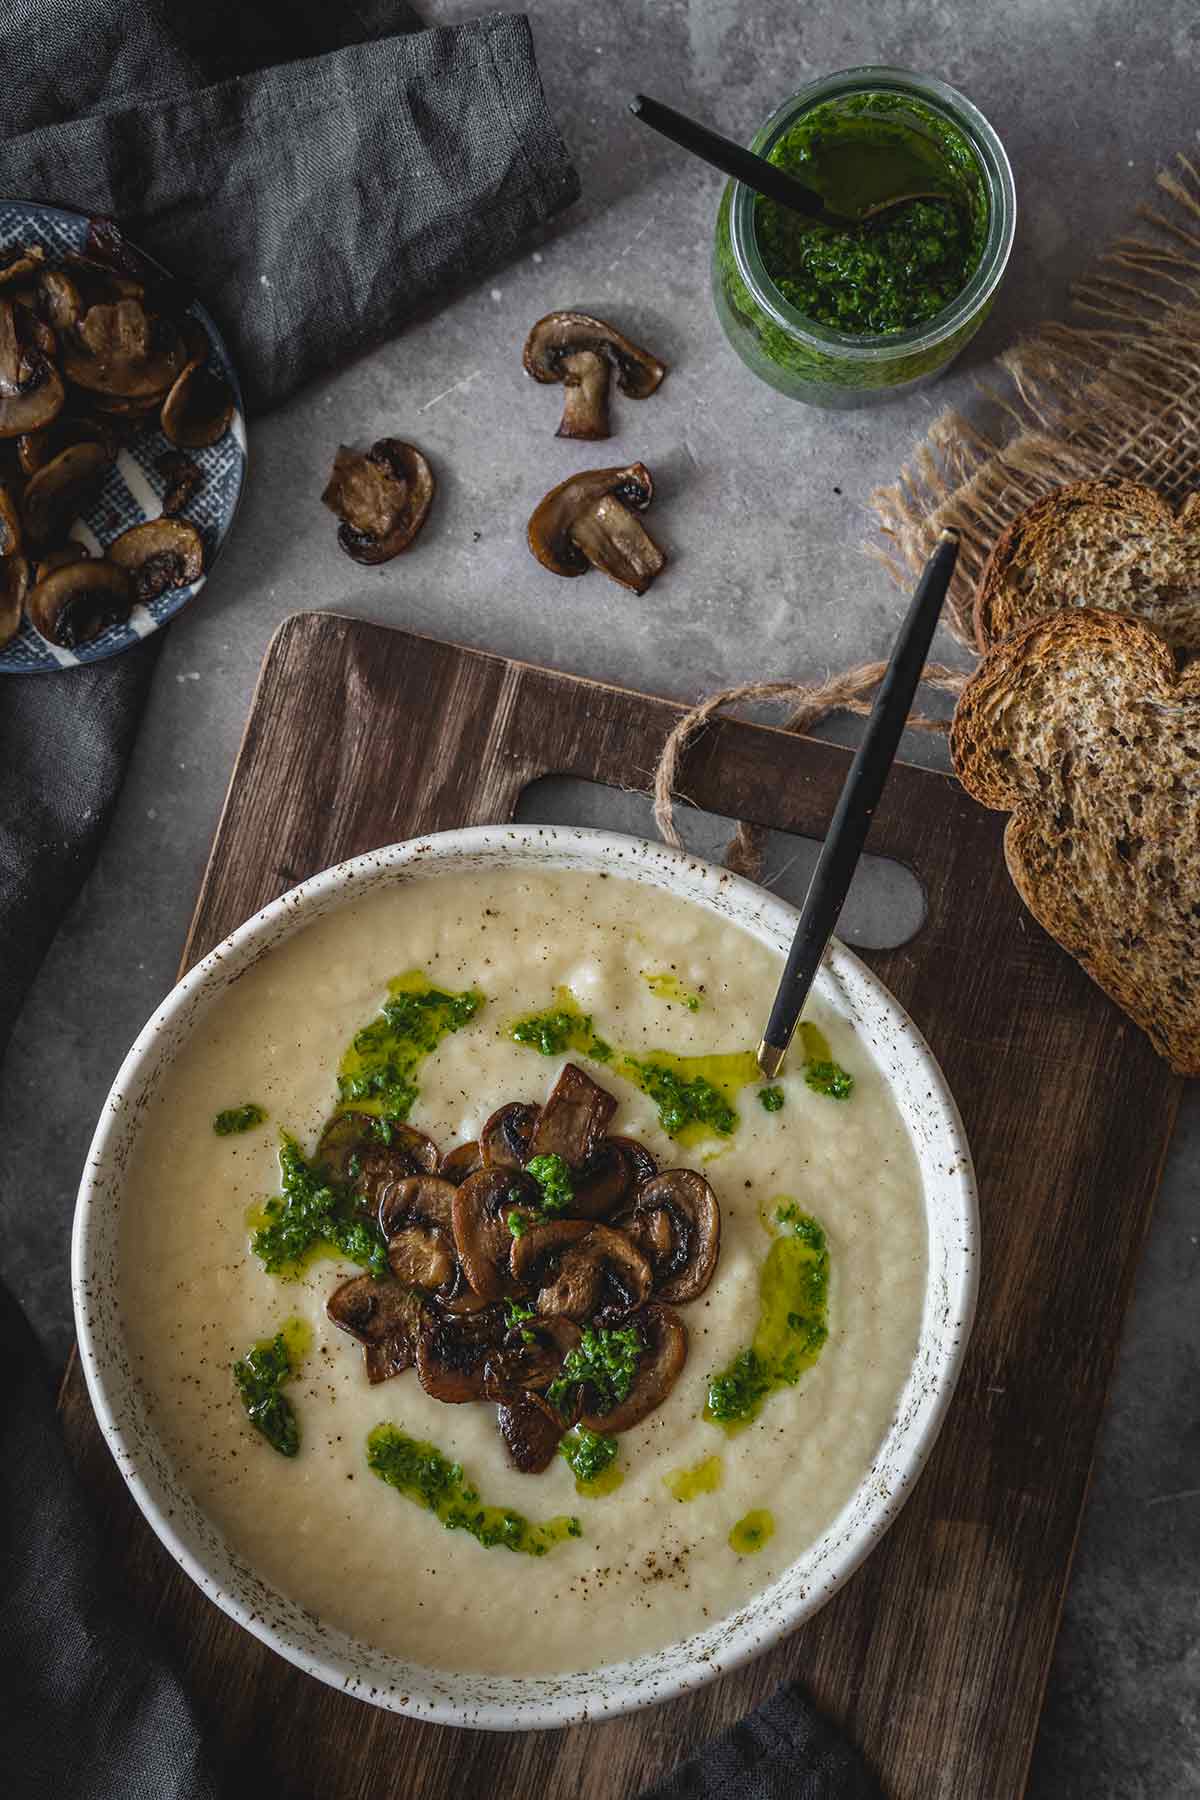 Creamy celery root soup with mushrooms and chive oil